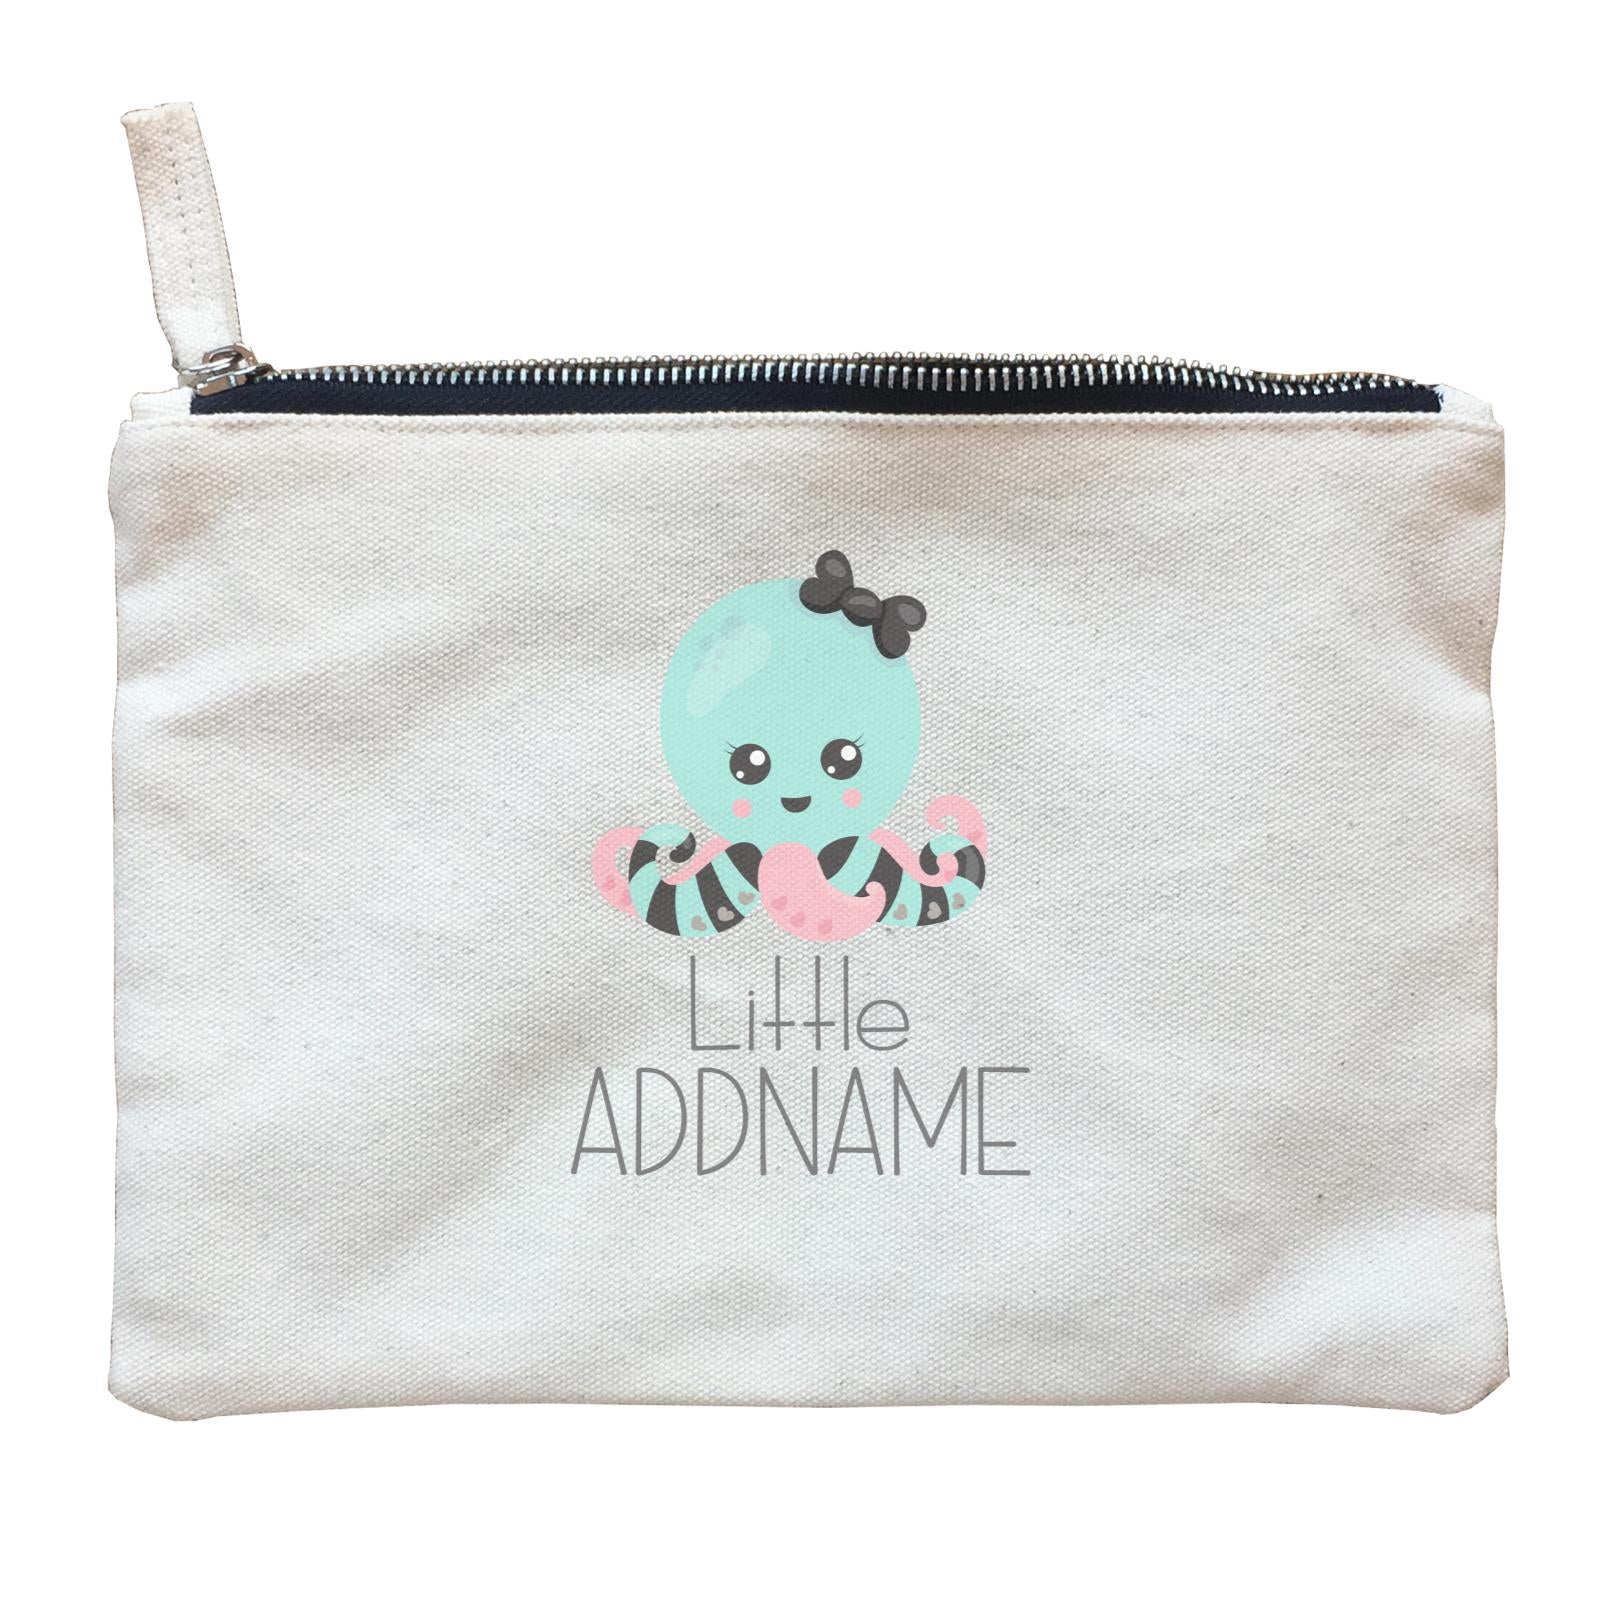 Nursery Animals Little Octopus with Ribbon Addname Zipper Pouch